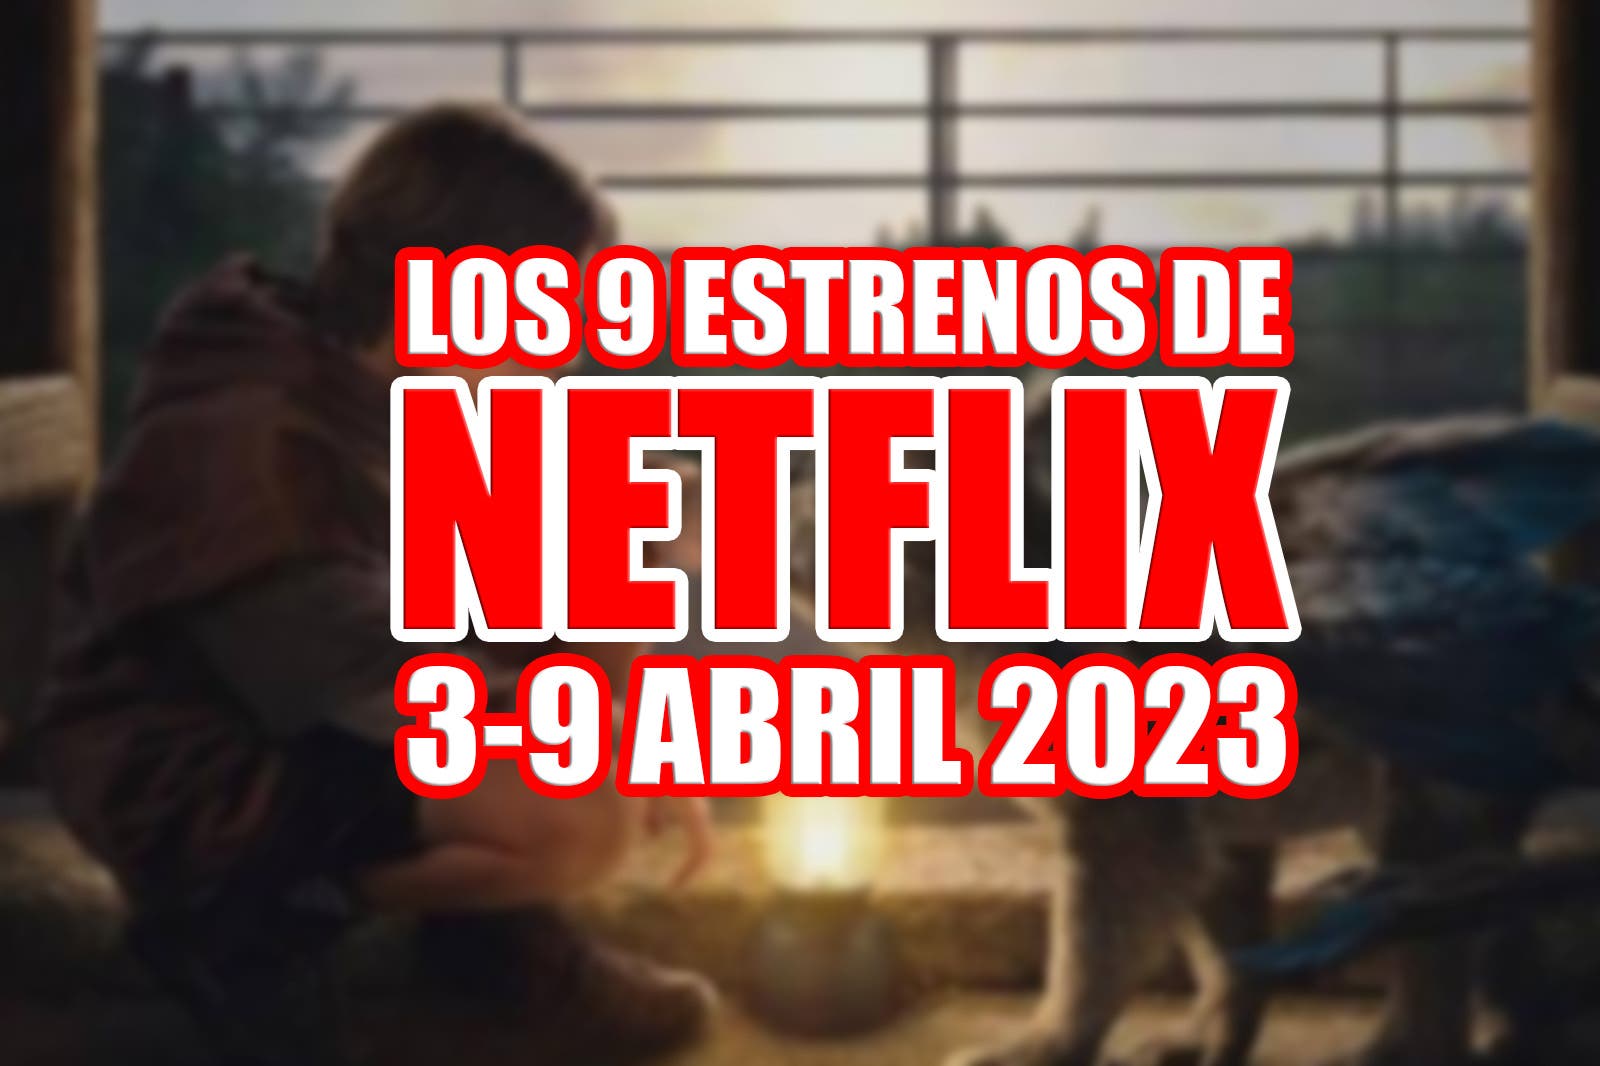 Netflix’s 9 premieres this week (April 3-9, 2023) and which are the best